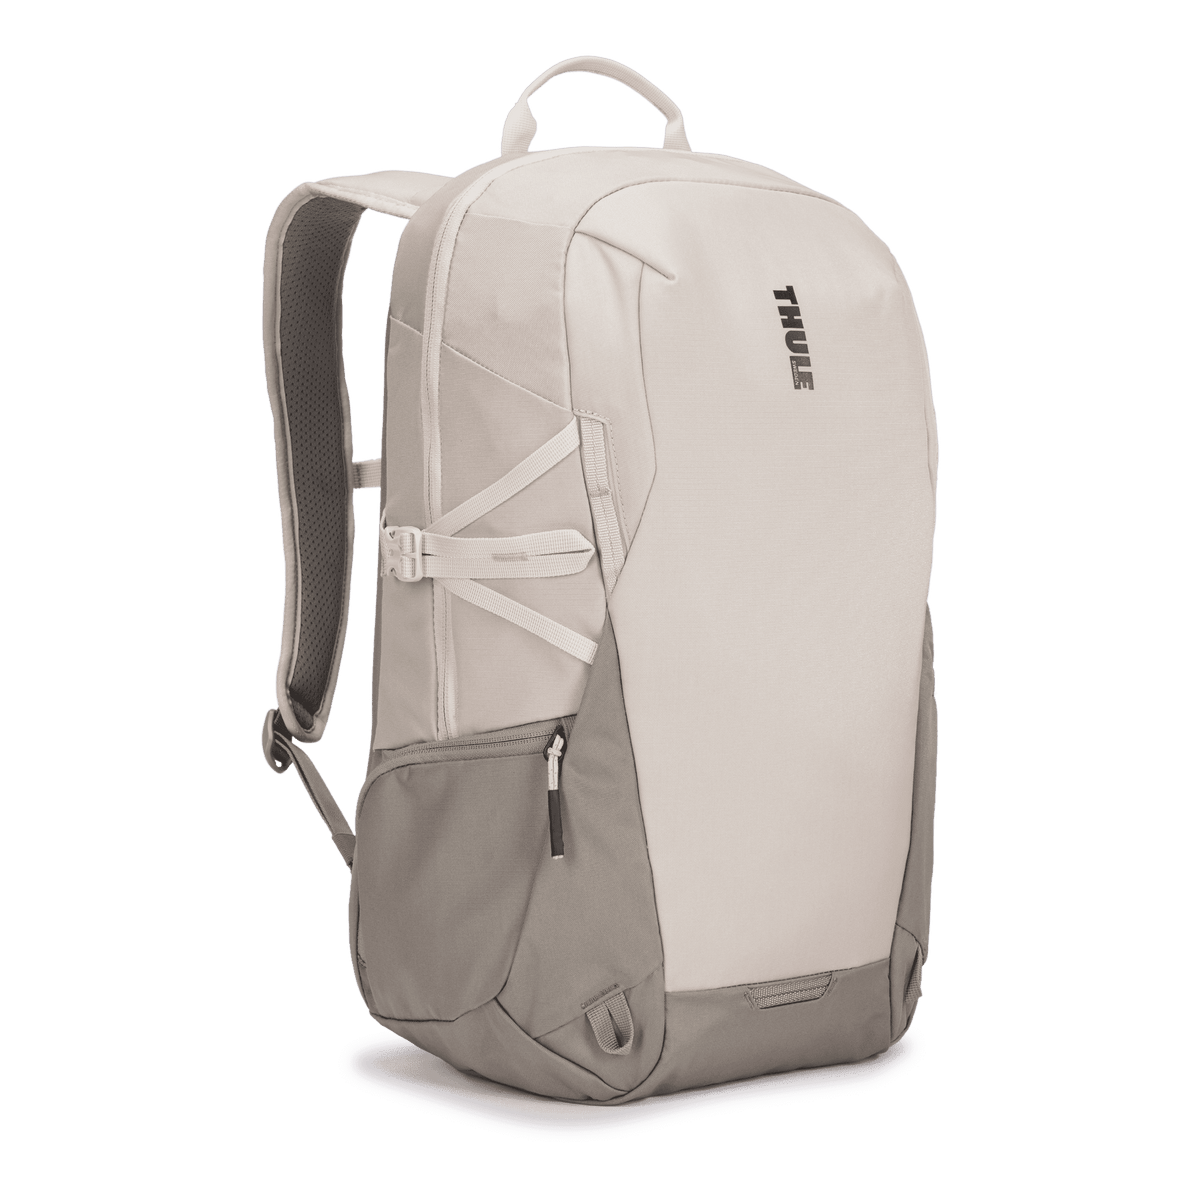 EnRoute Backpack 21L | Thule - Wake Concept Store  